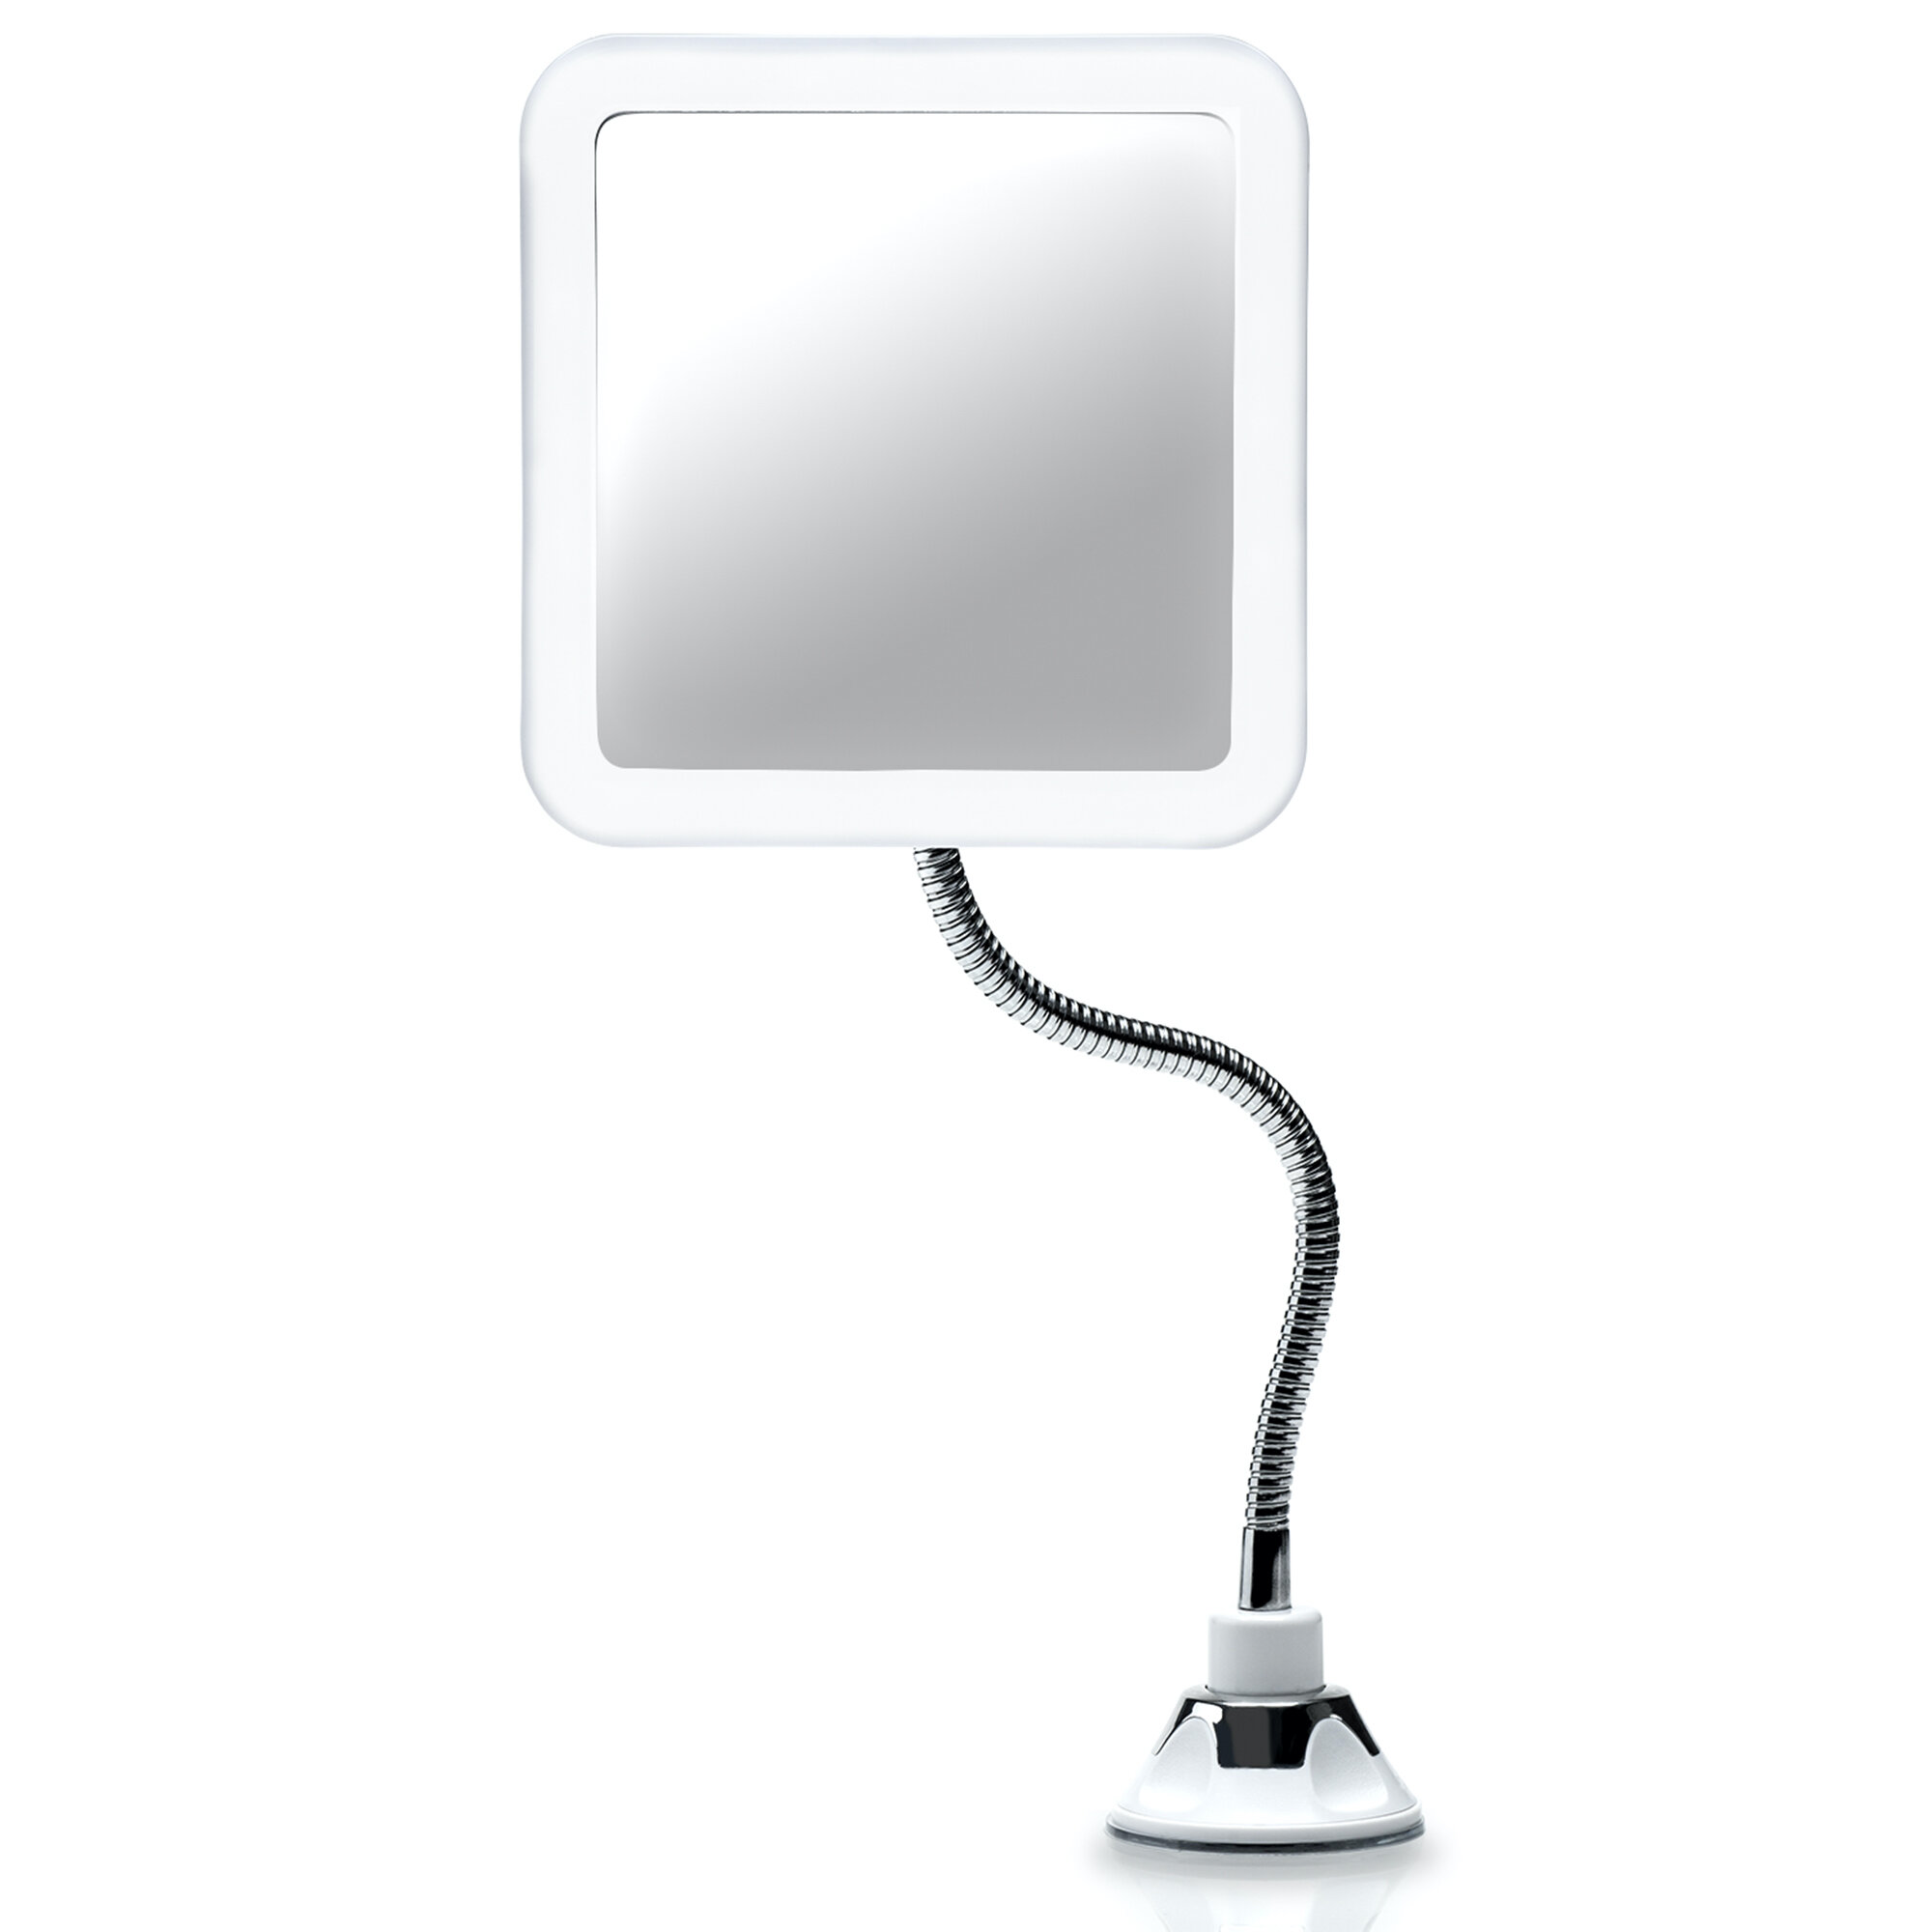 PQZATX Led 10X Magnifying Makeup Mirror Lighted Vanity Bathroom Round Mirror with 360 Degree Swivel Rotation Flexible 